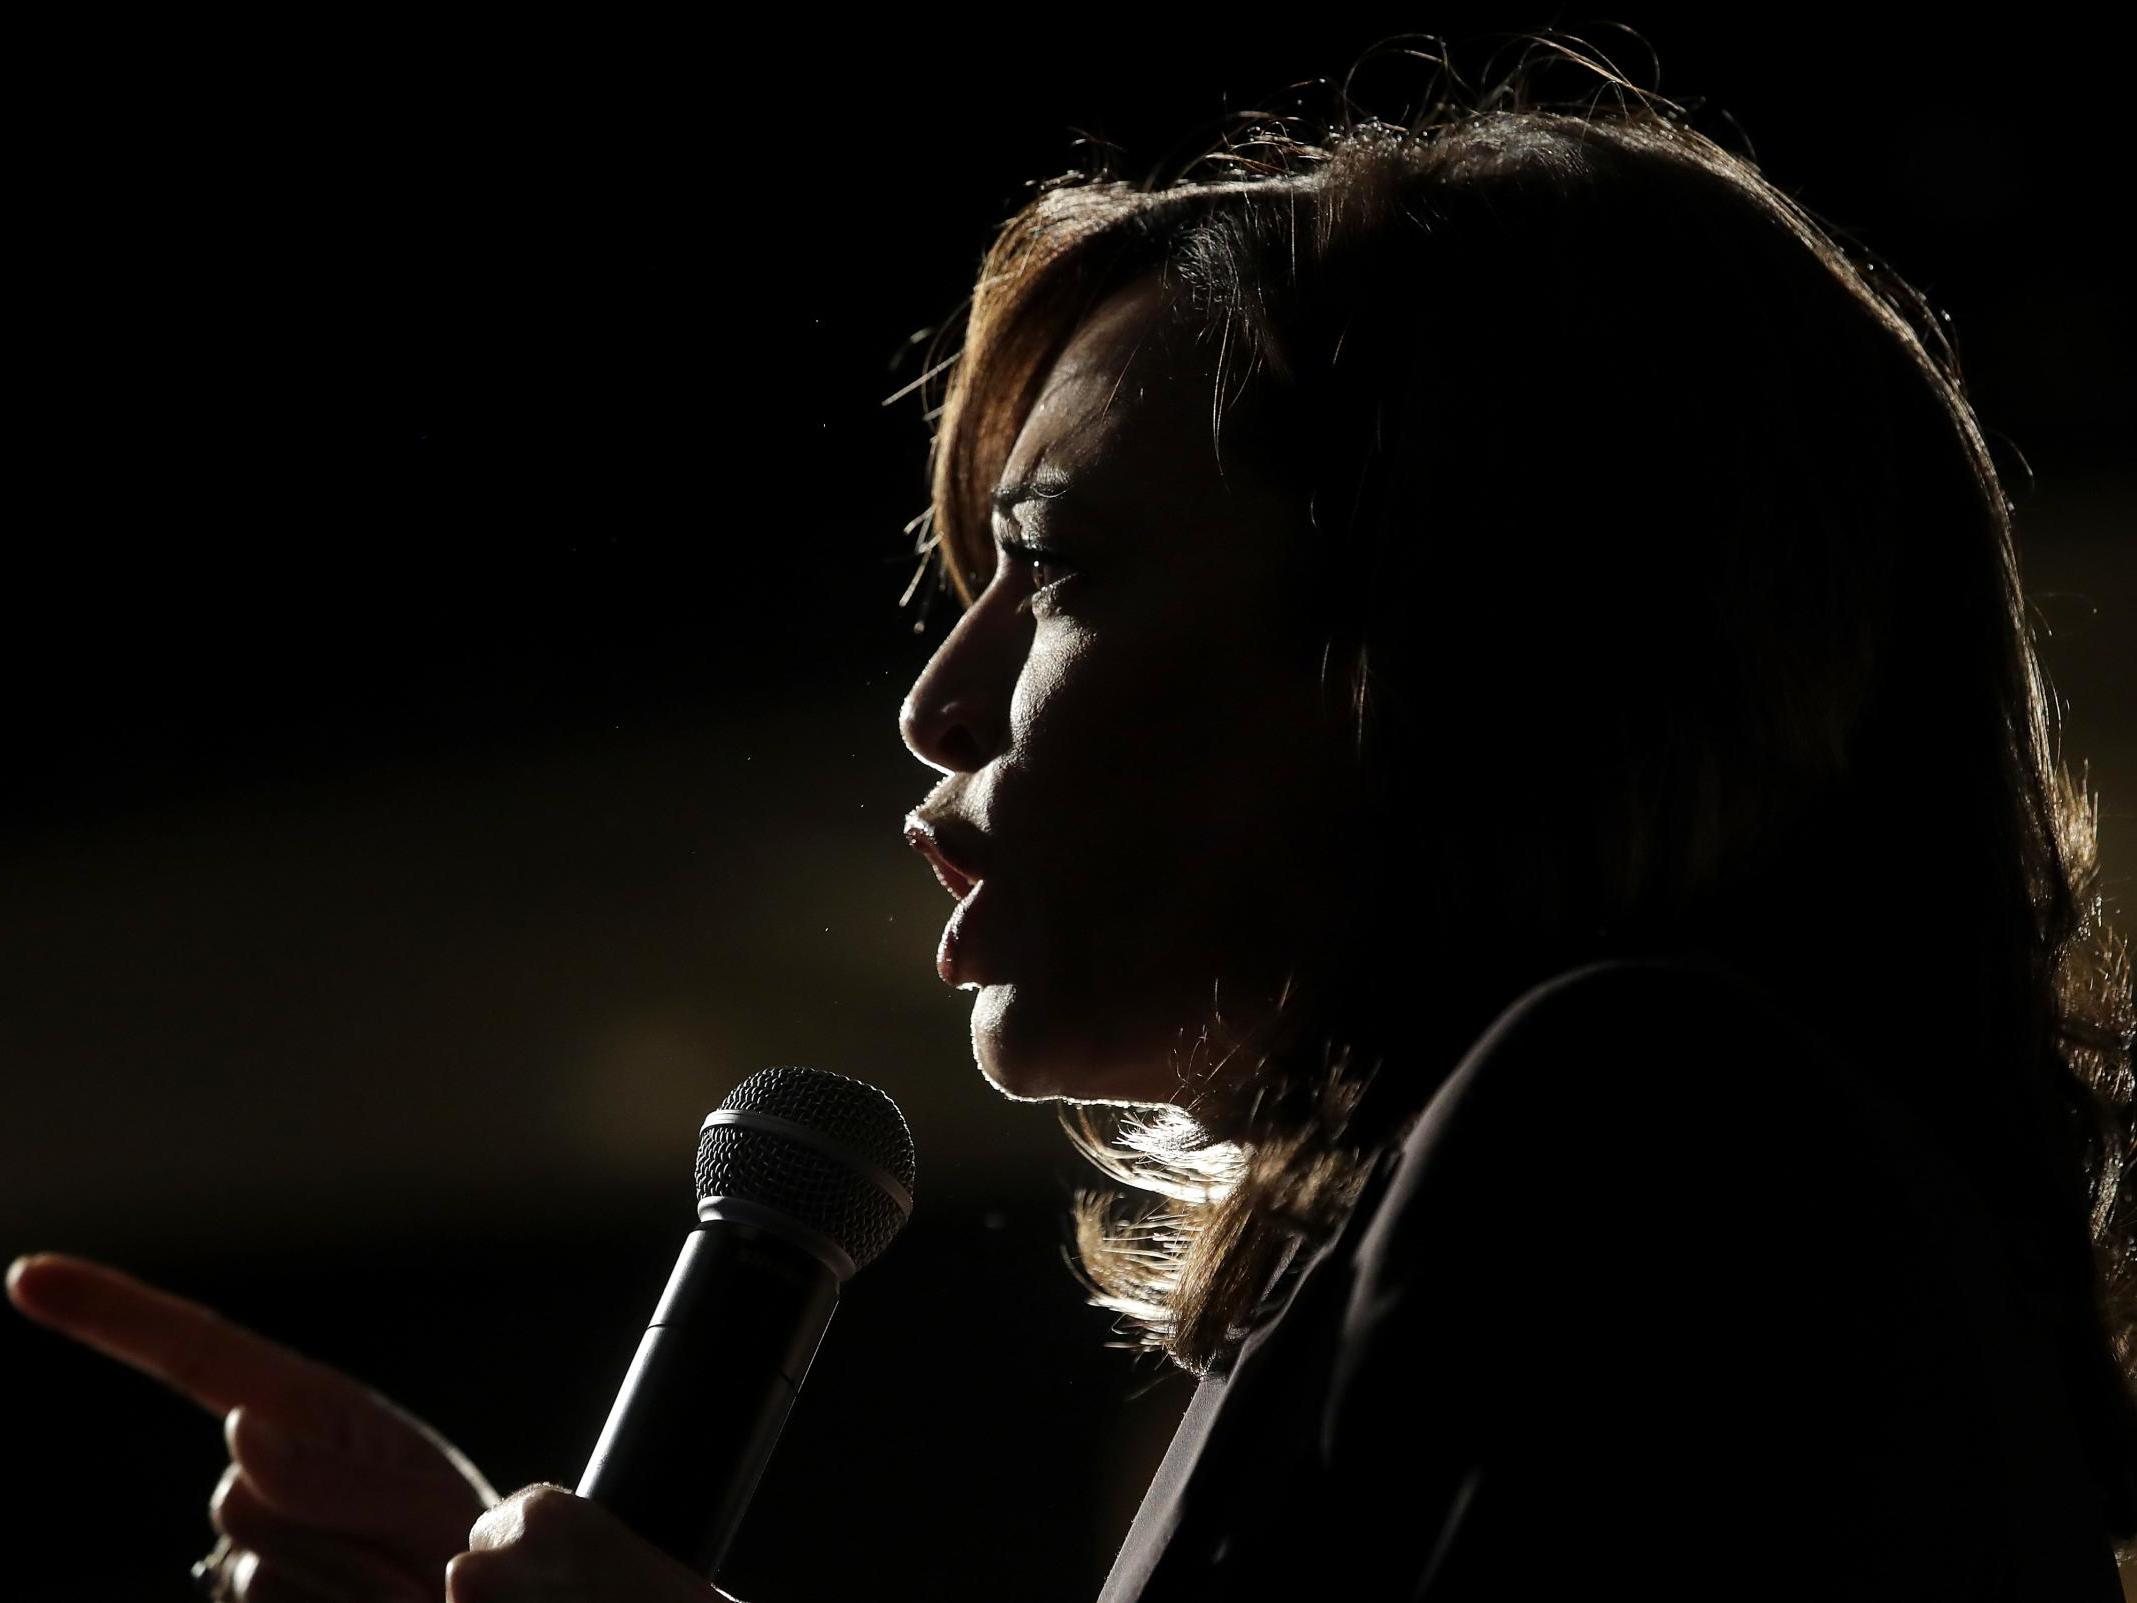 Democratic senator Kamala Harris is only the second black woman to serve in the Senate, and in 2020, a prominent contender for the vice-presidential ticket